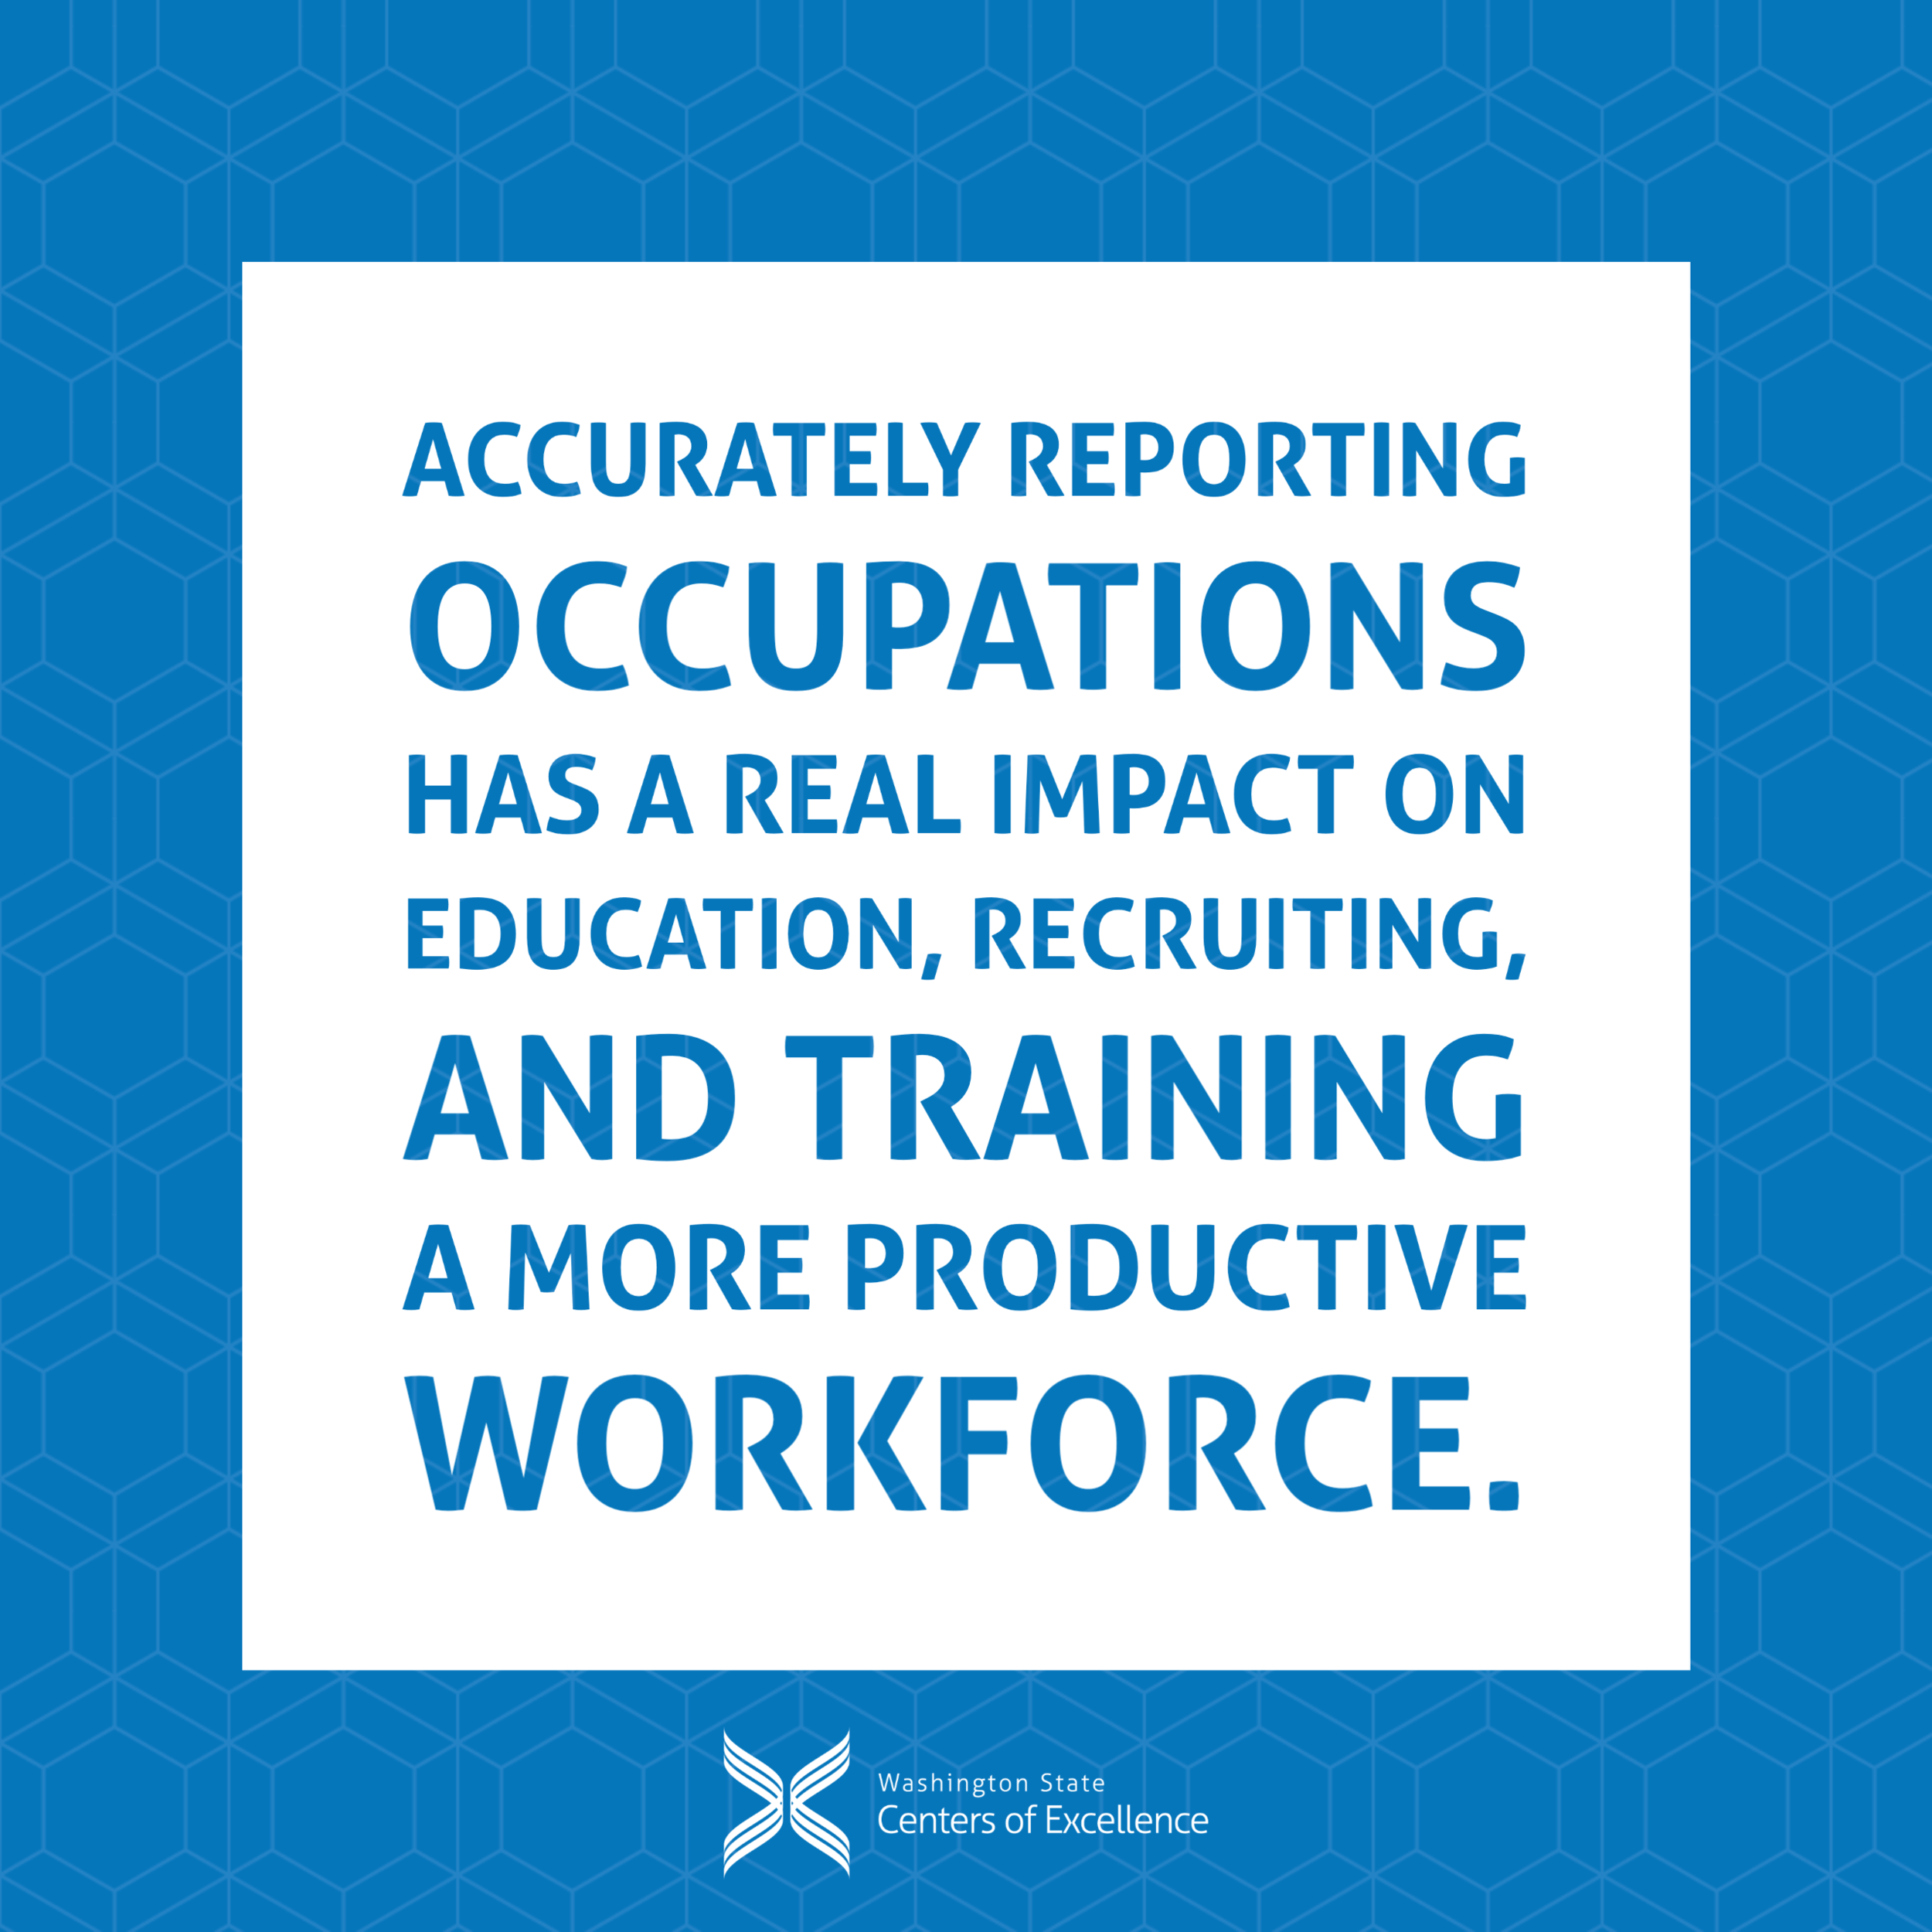 Accurately reporting occupations has a real impact on education, recruiting, and training a more productive workforce.